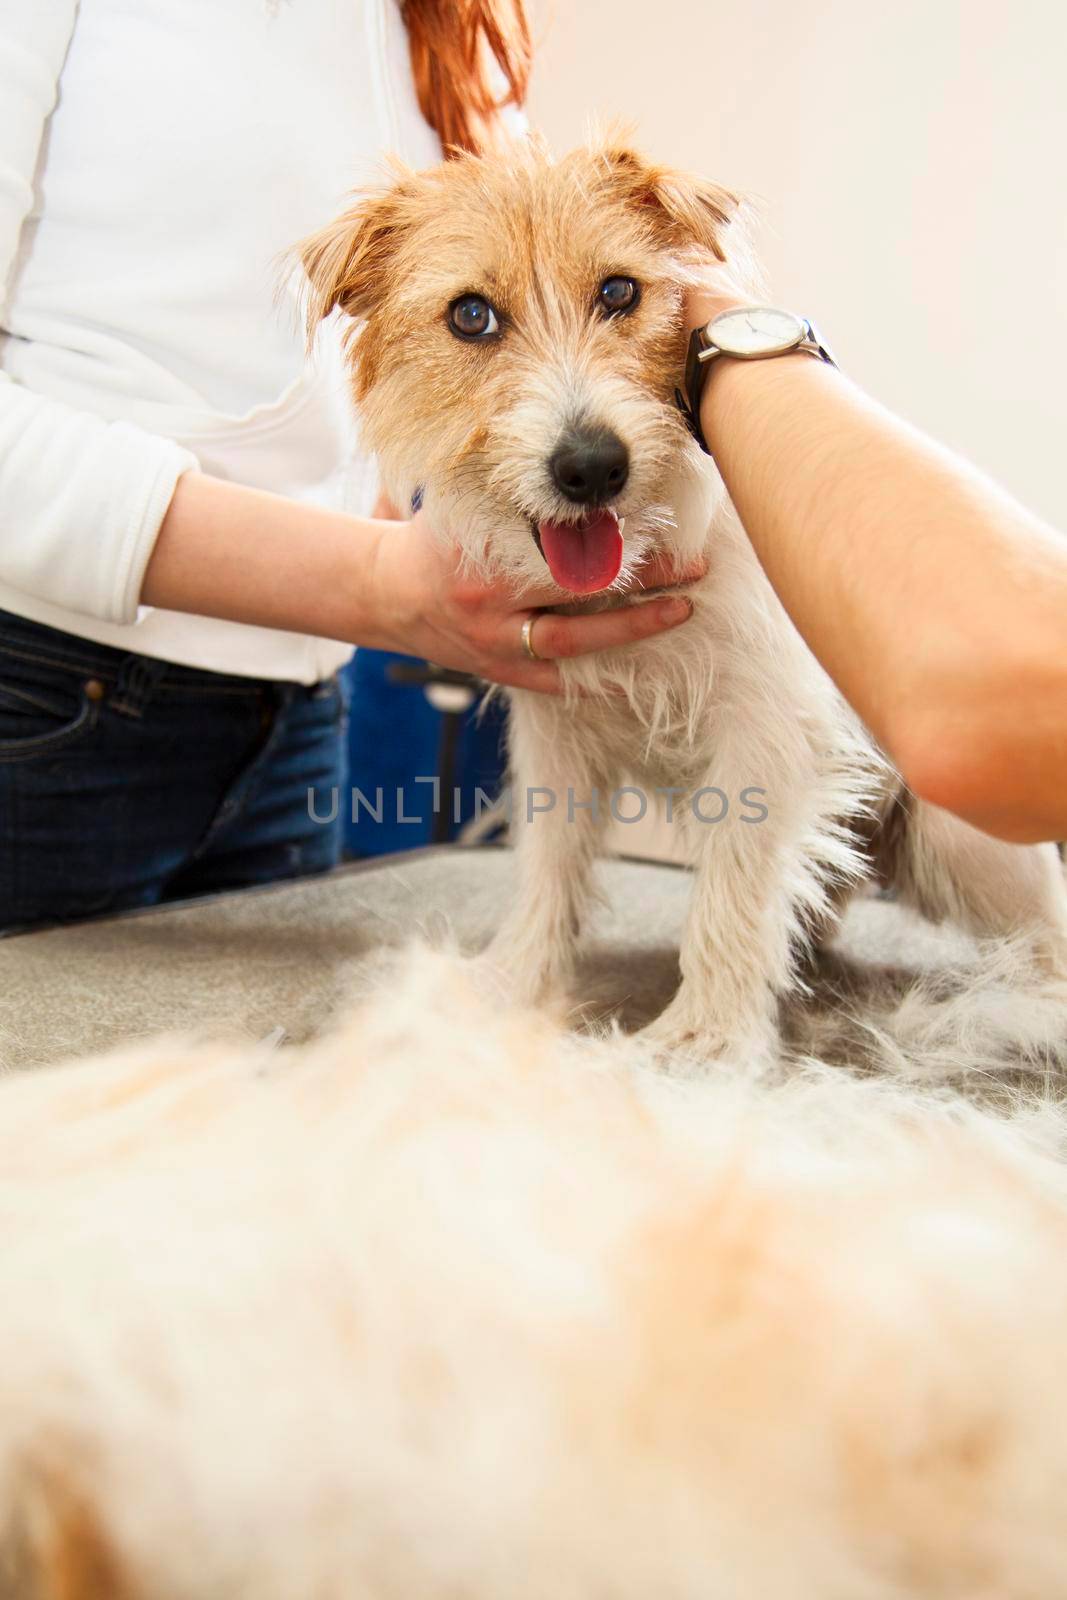 Jack Russell Terrier getting his hair cut at the groomer